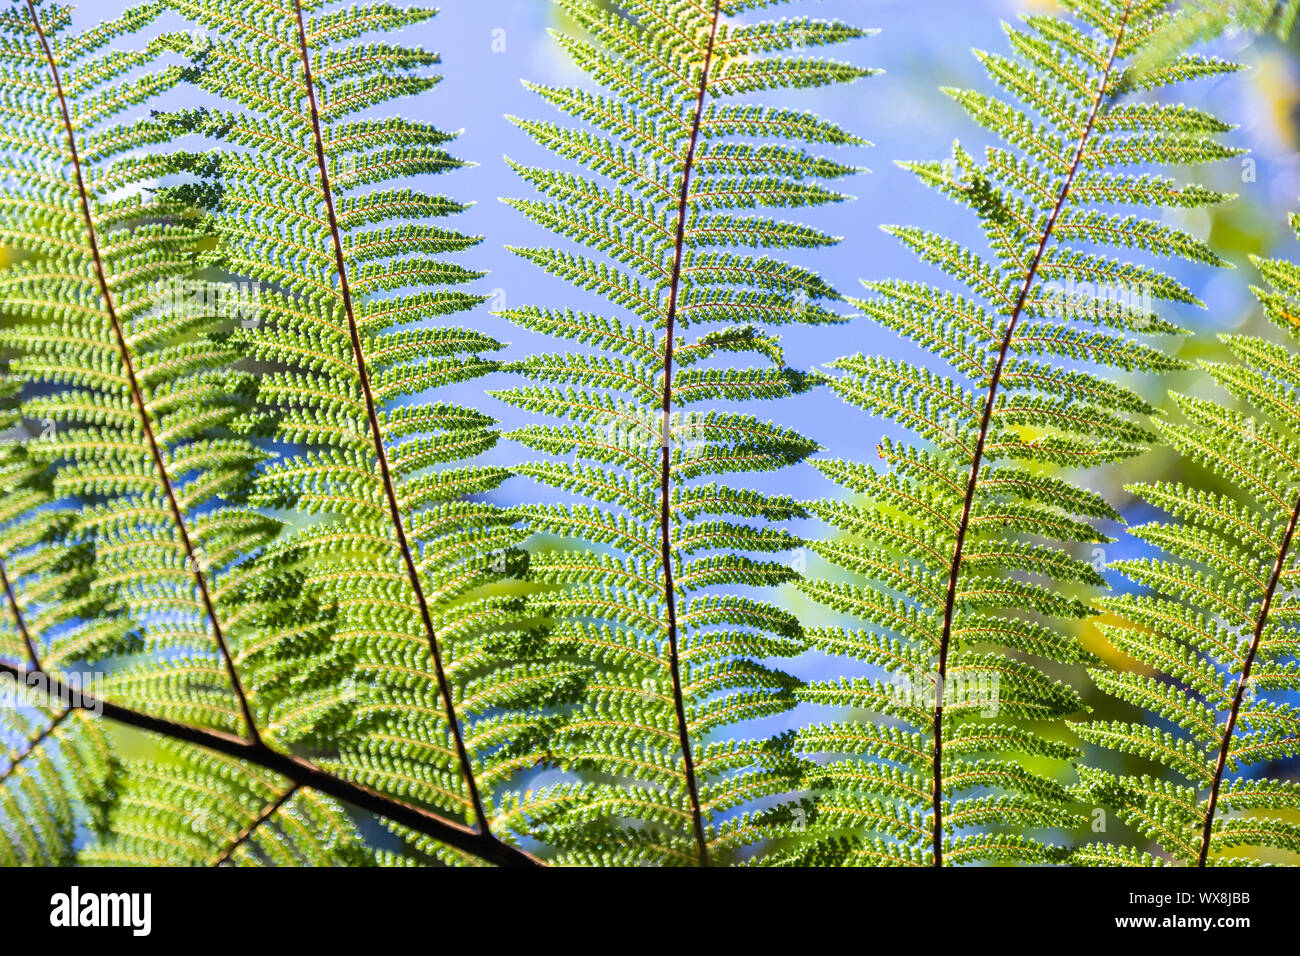 An image of a typical fern leaf in New Zealand Stock Photo